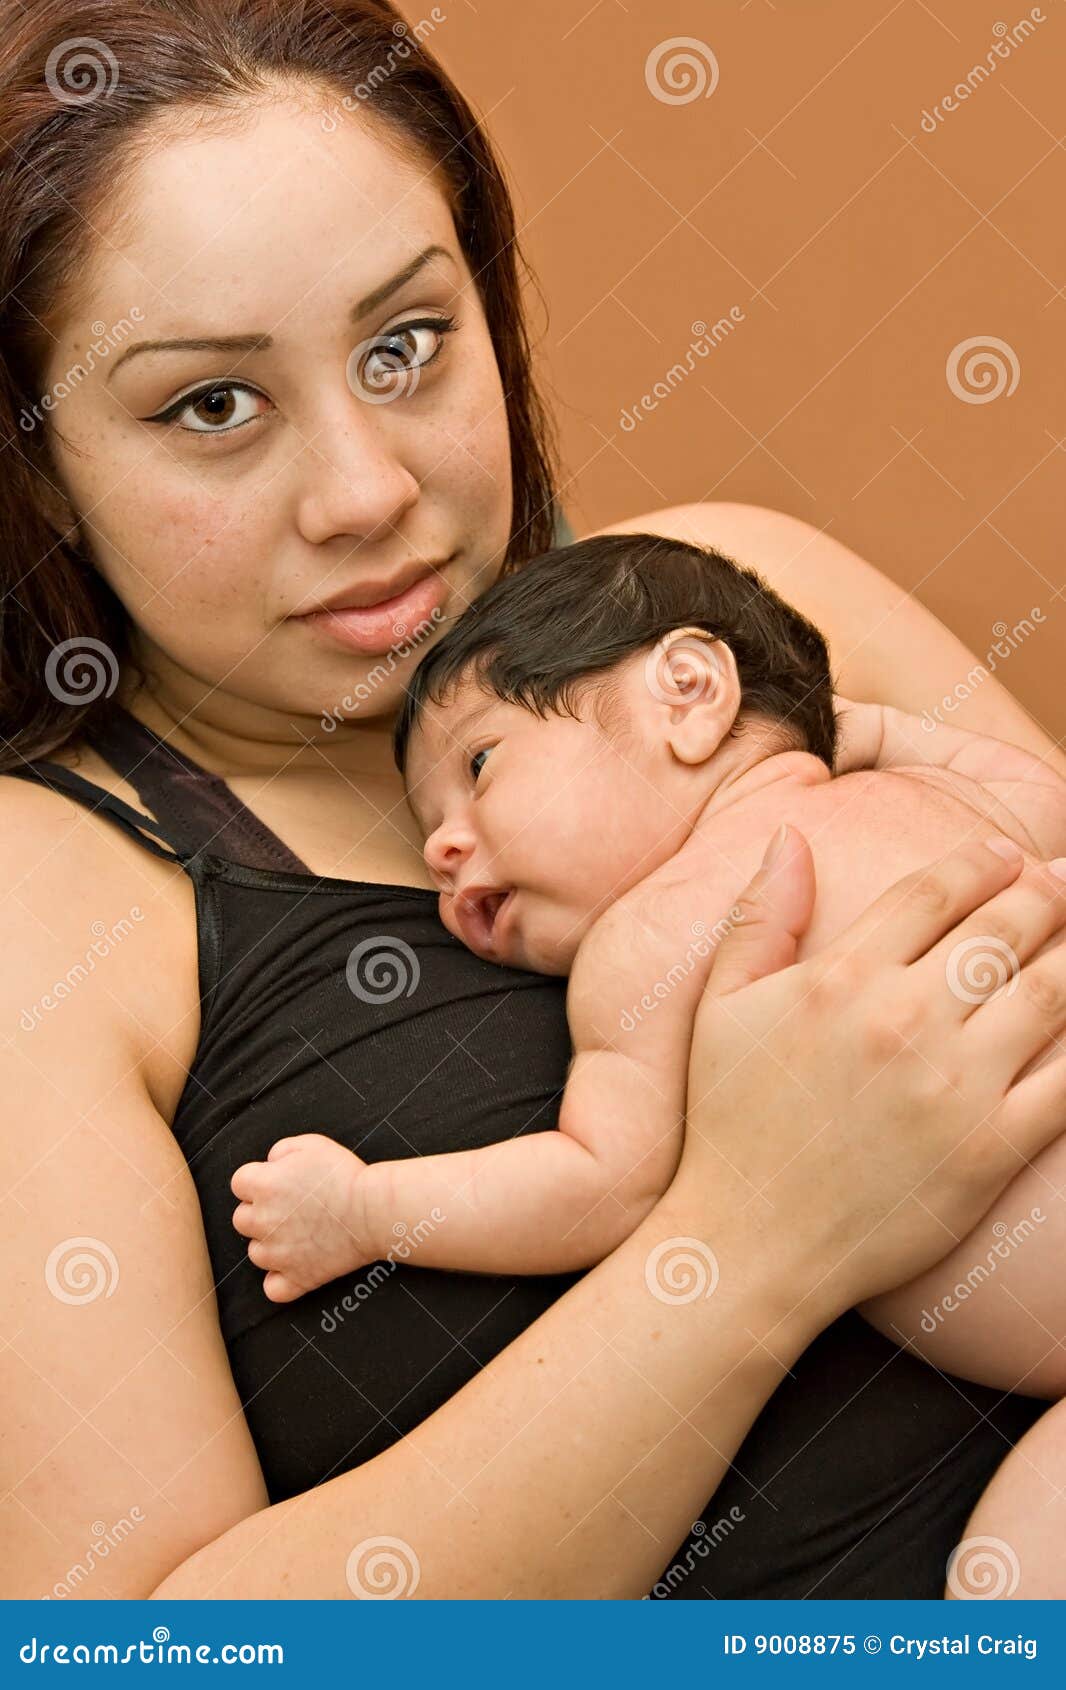 young hispanic mother and newborn infant